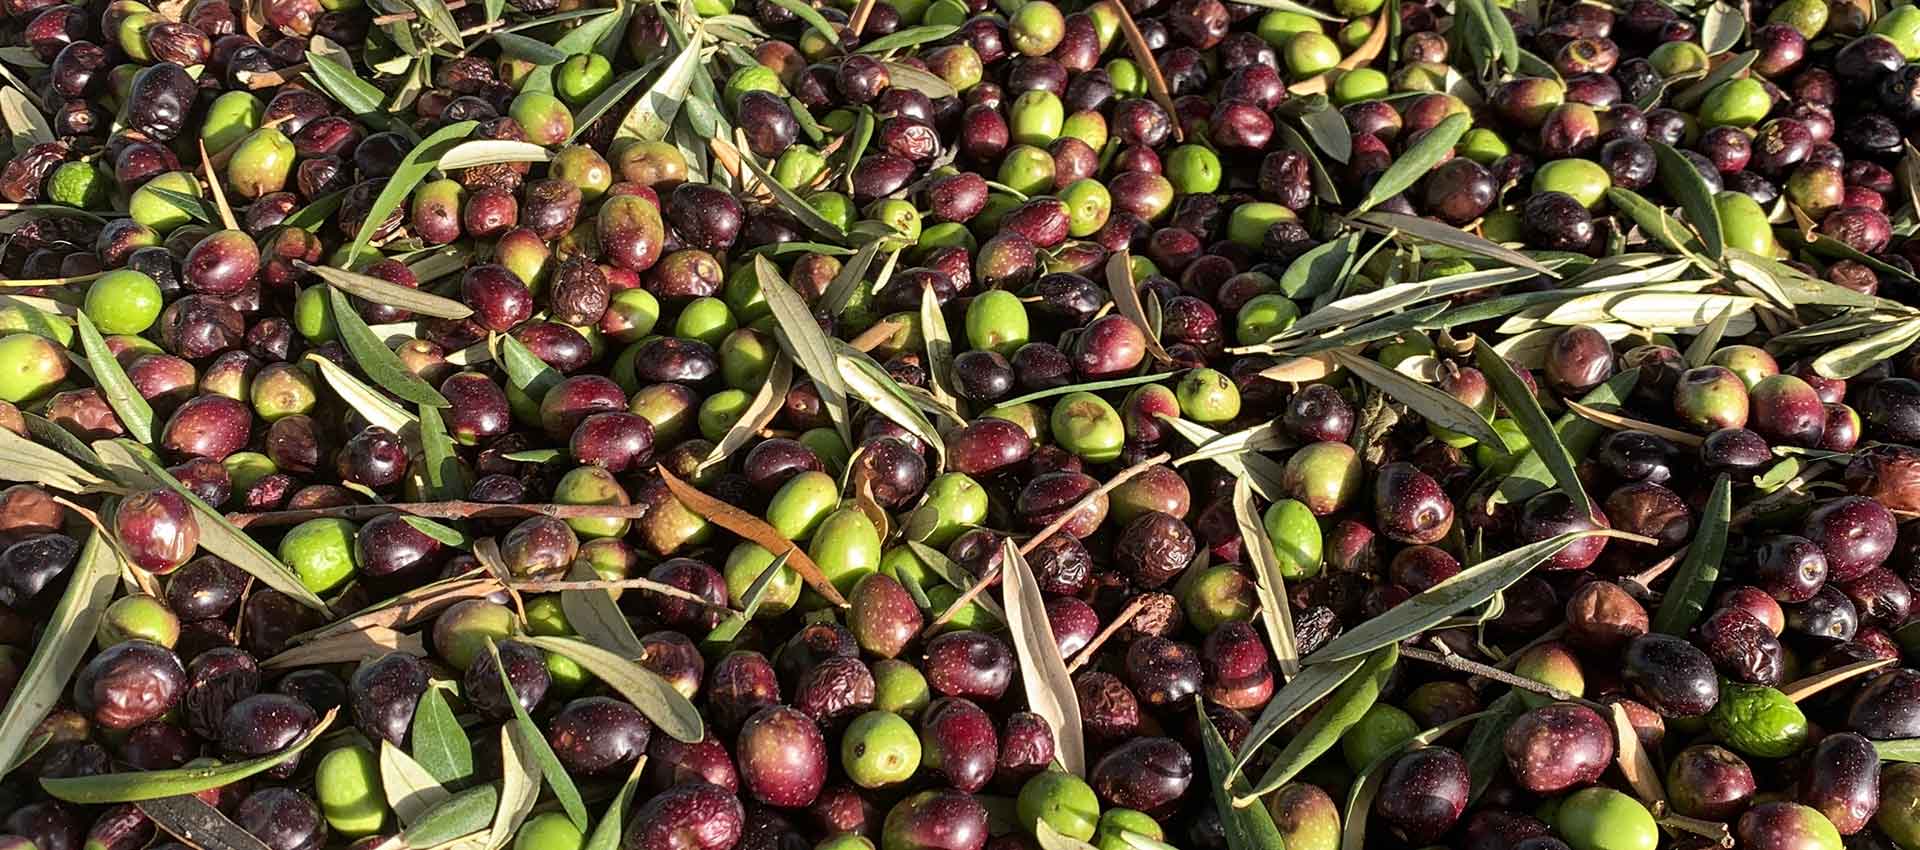 Olives - All The Products You Can Buy In Pakistan